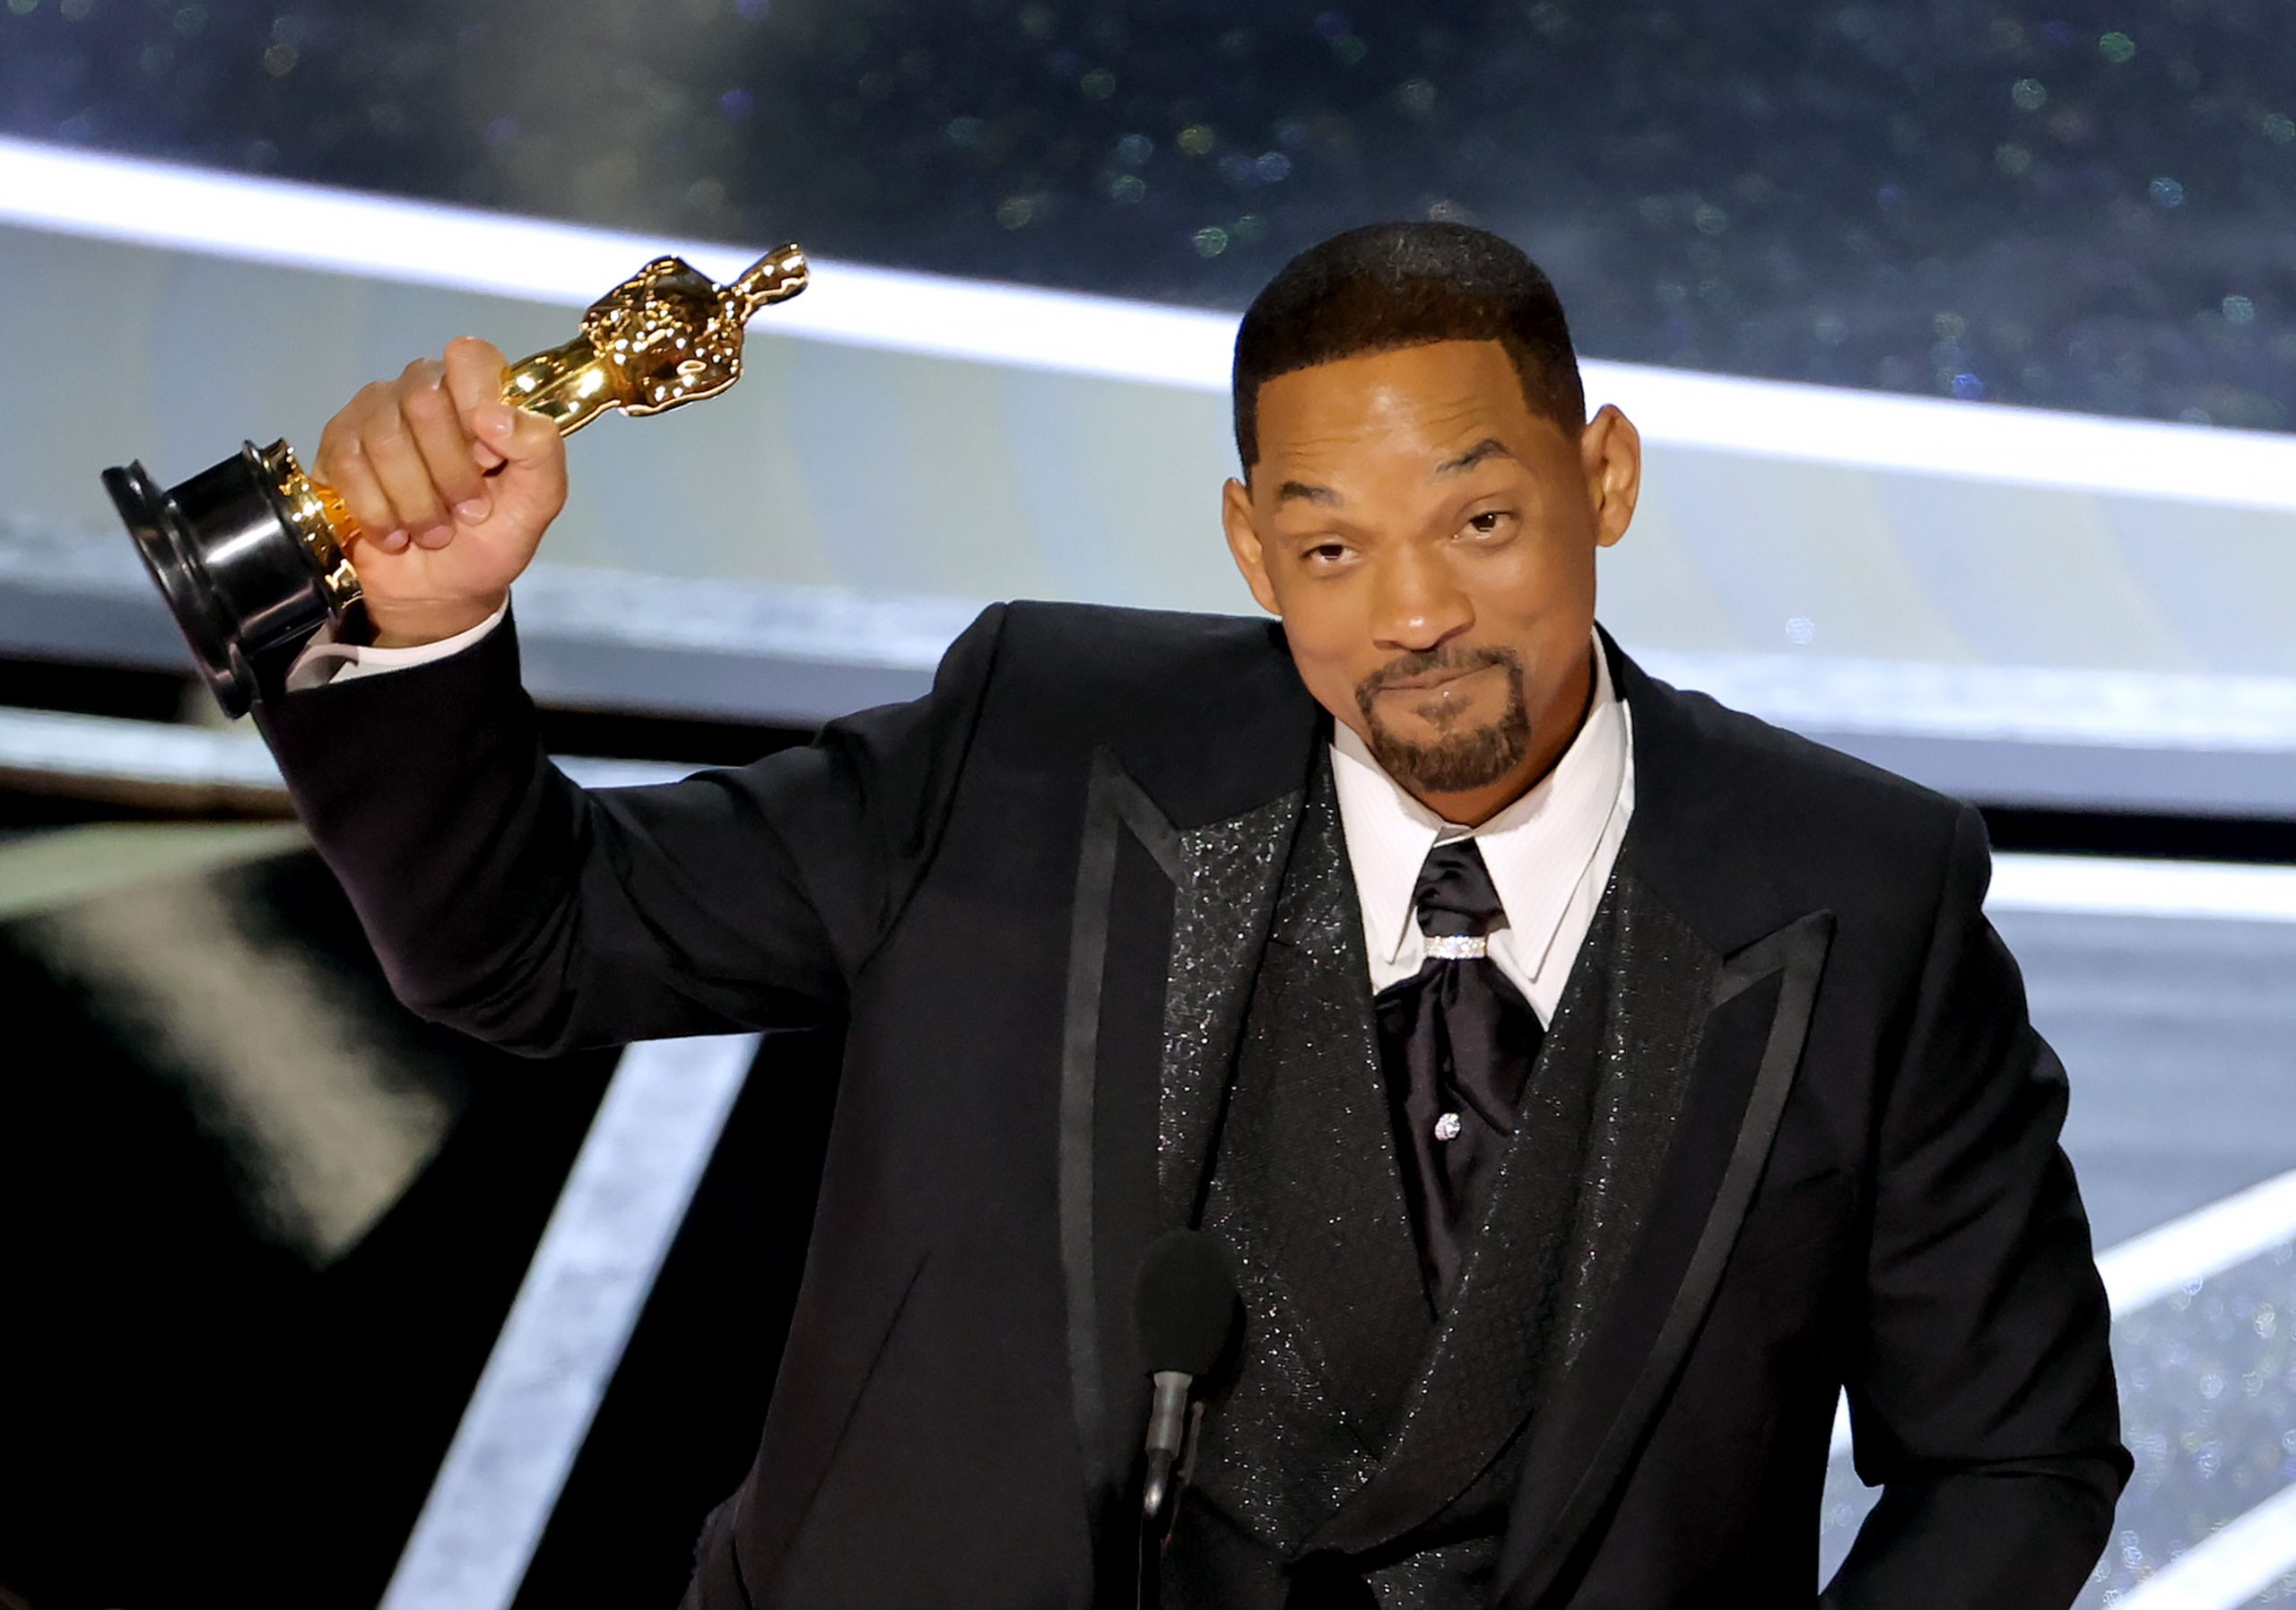 Will Smith at the 94th Academy Awards